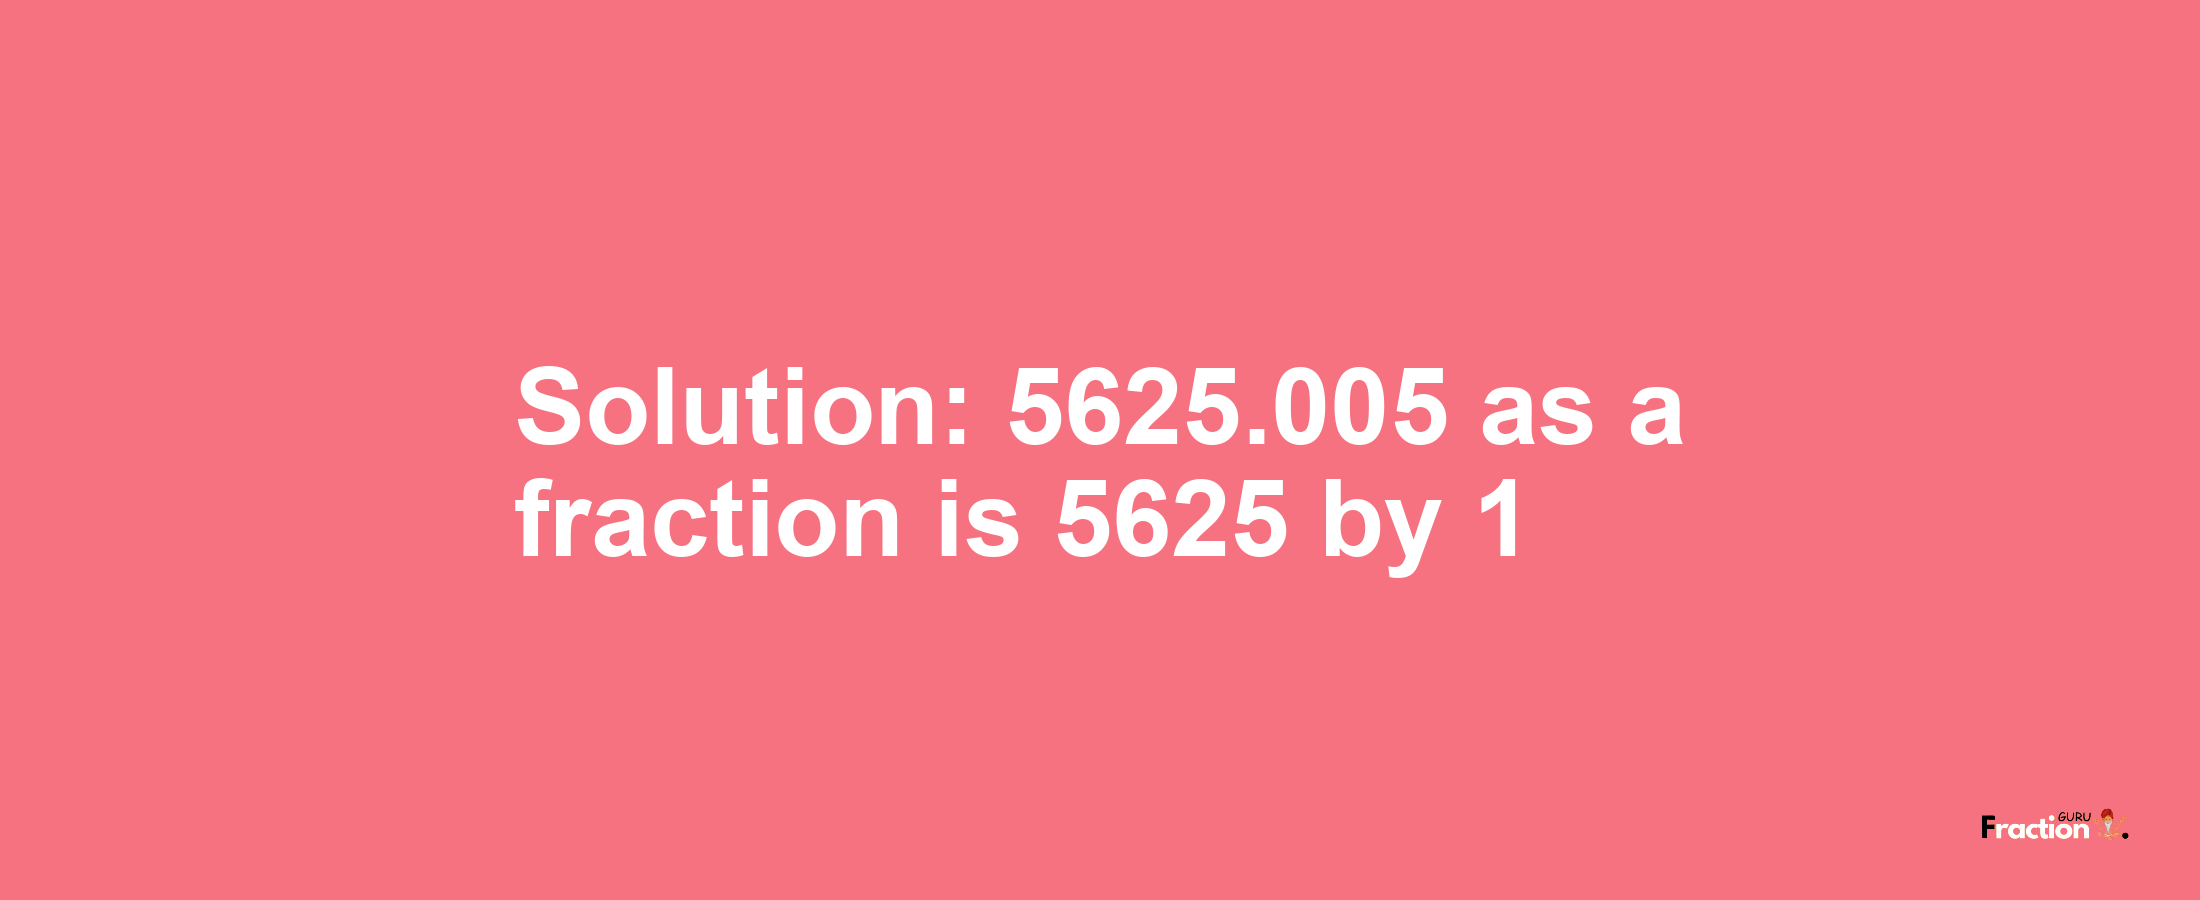 Solution:5625.005 as a fraction is 5625/1